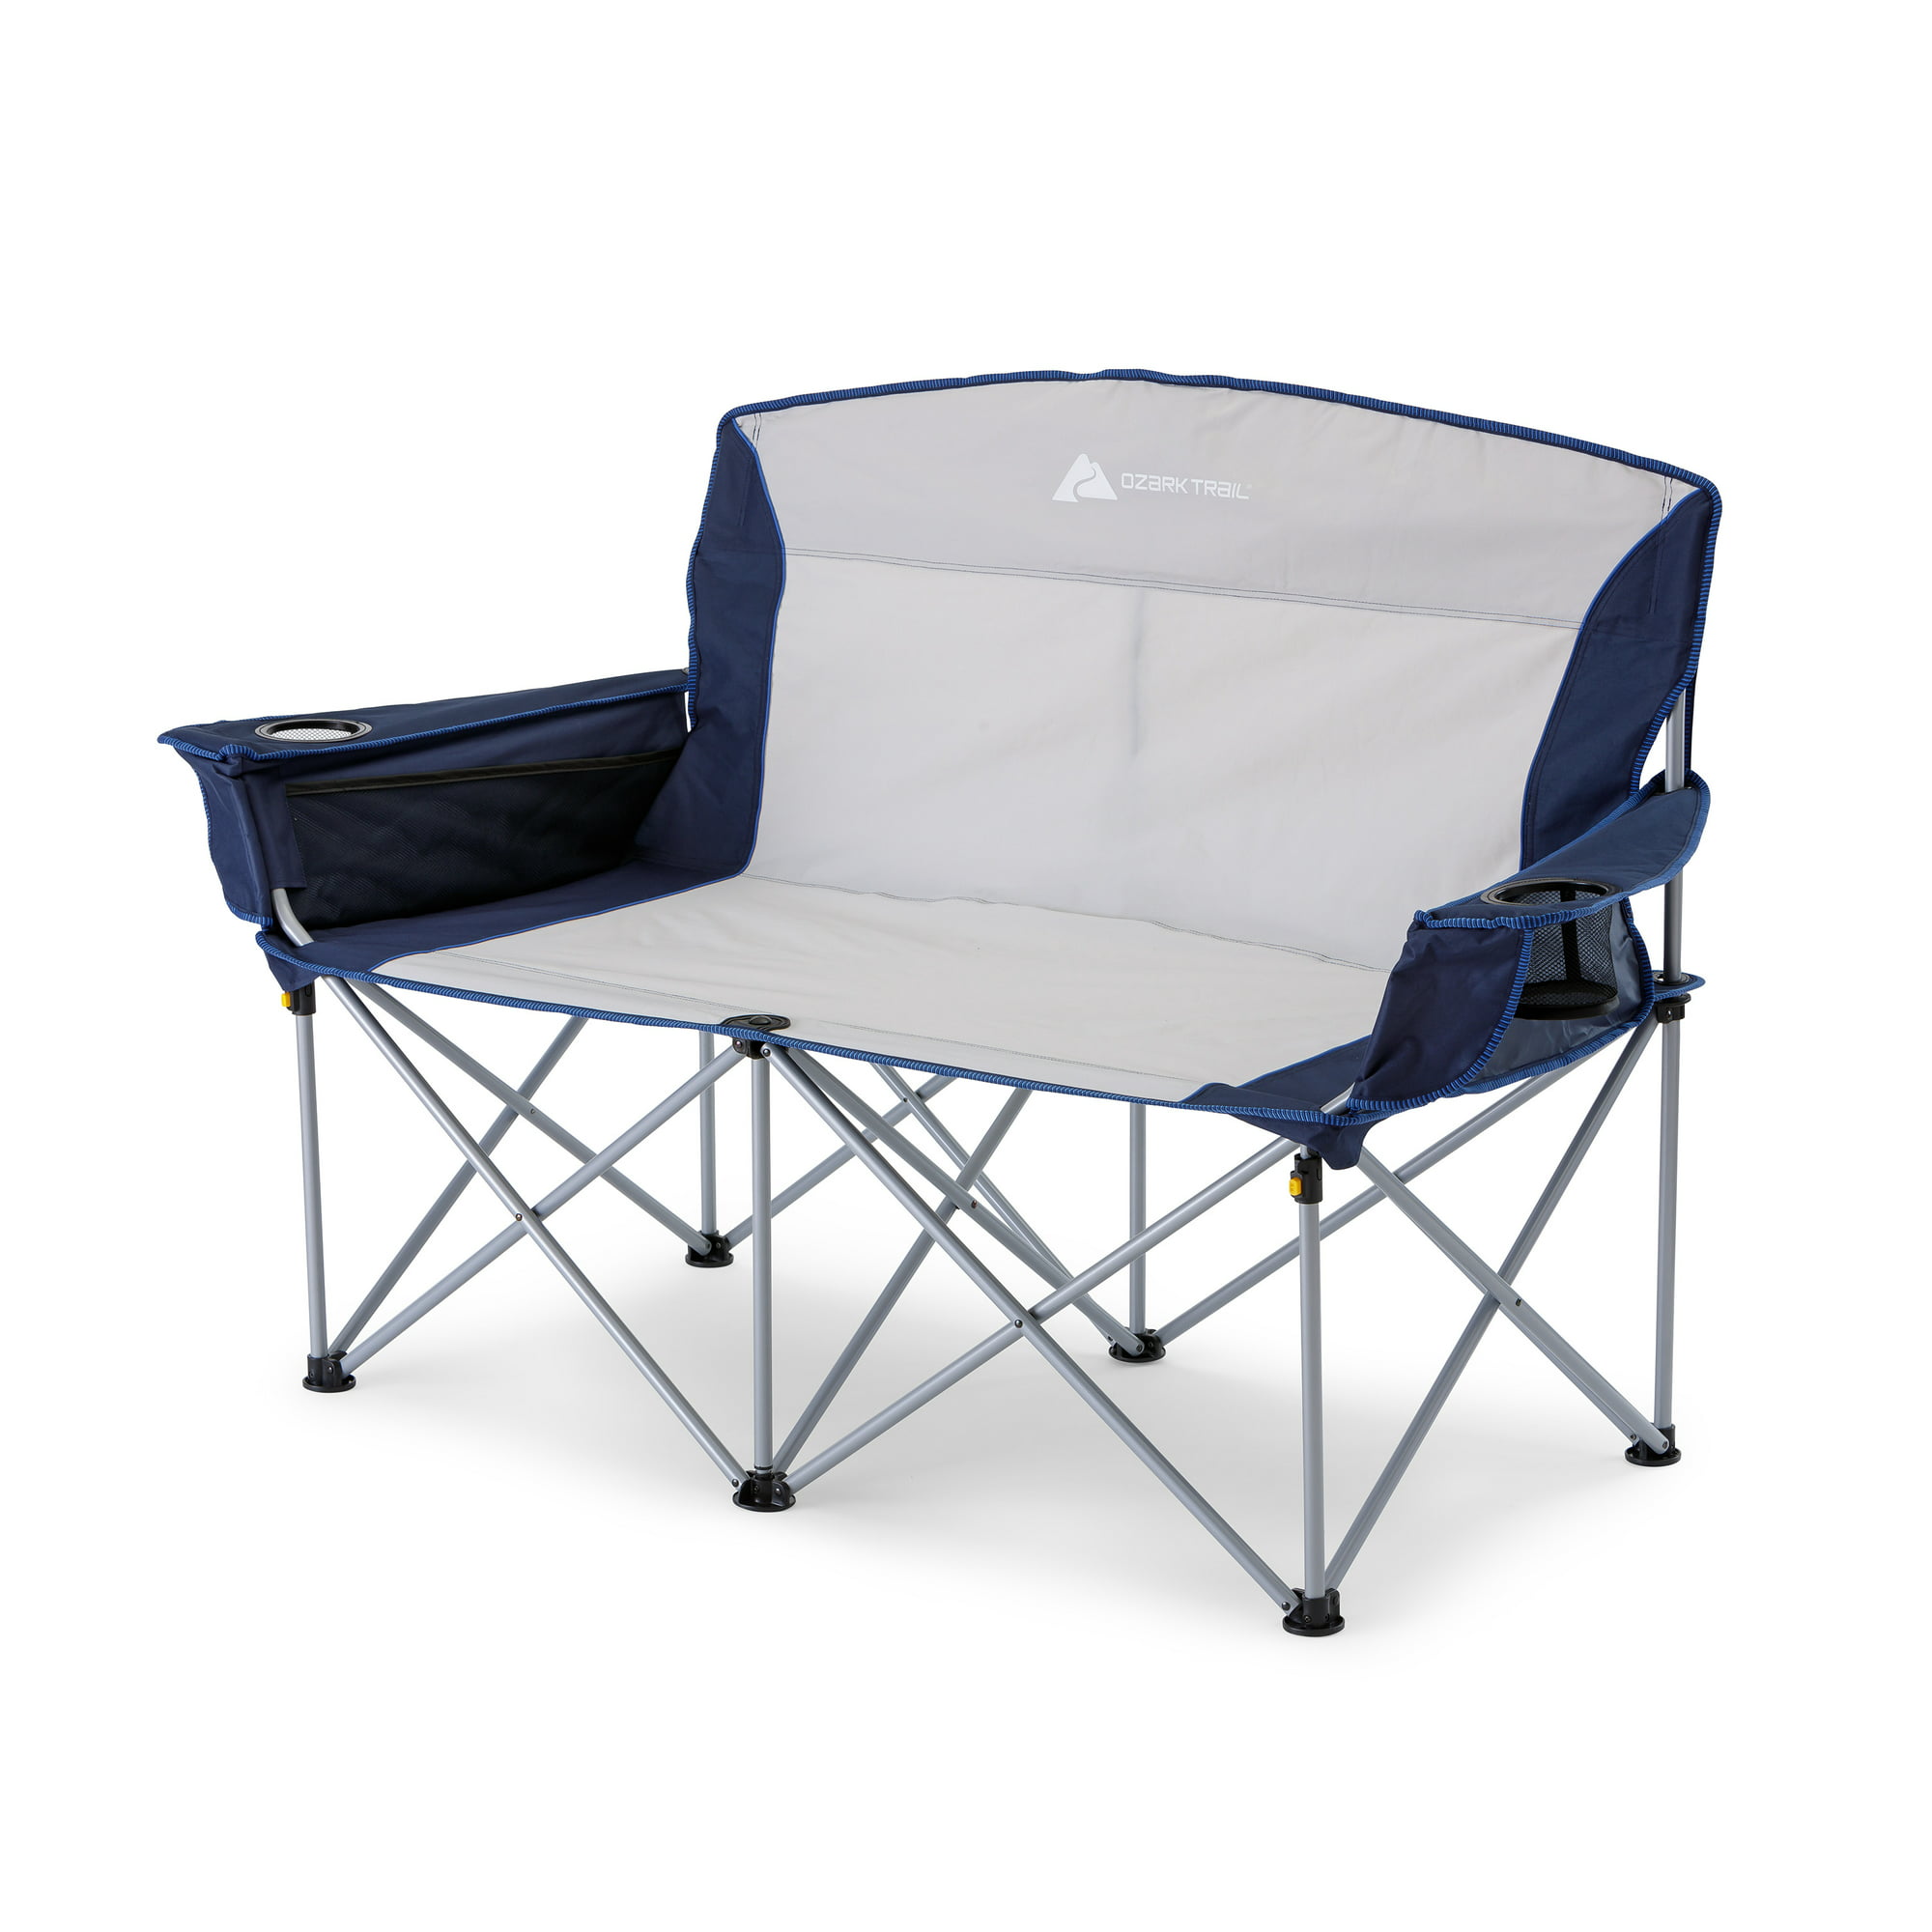 Ozark Trail Loveseat Camping Chair, Blue and Gray, Adult